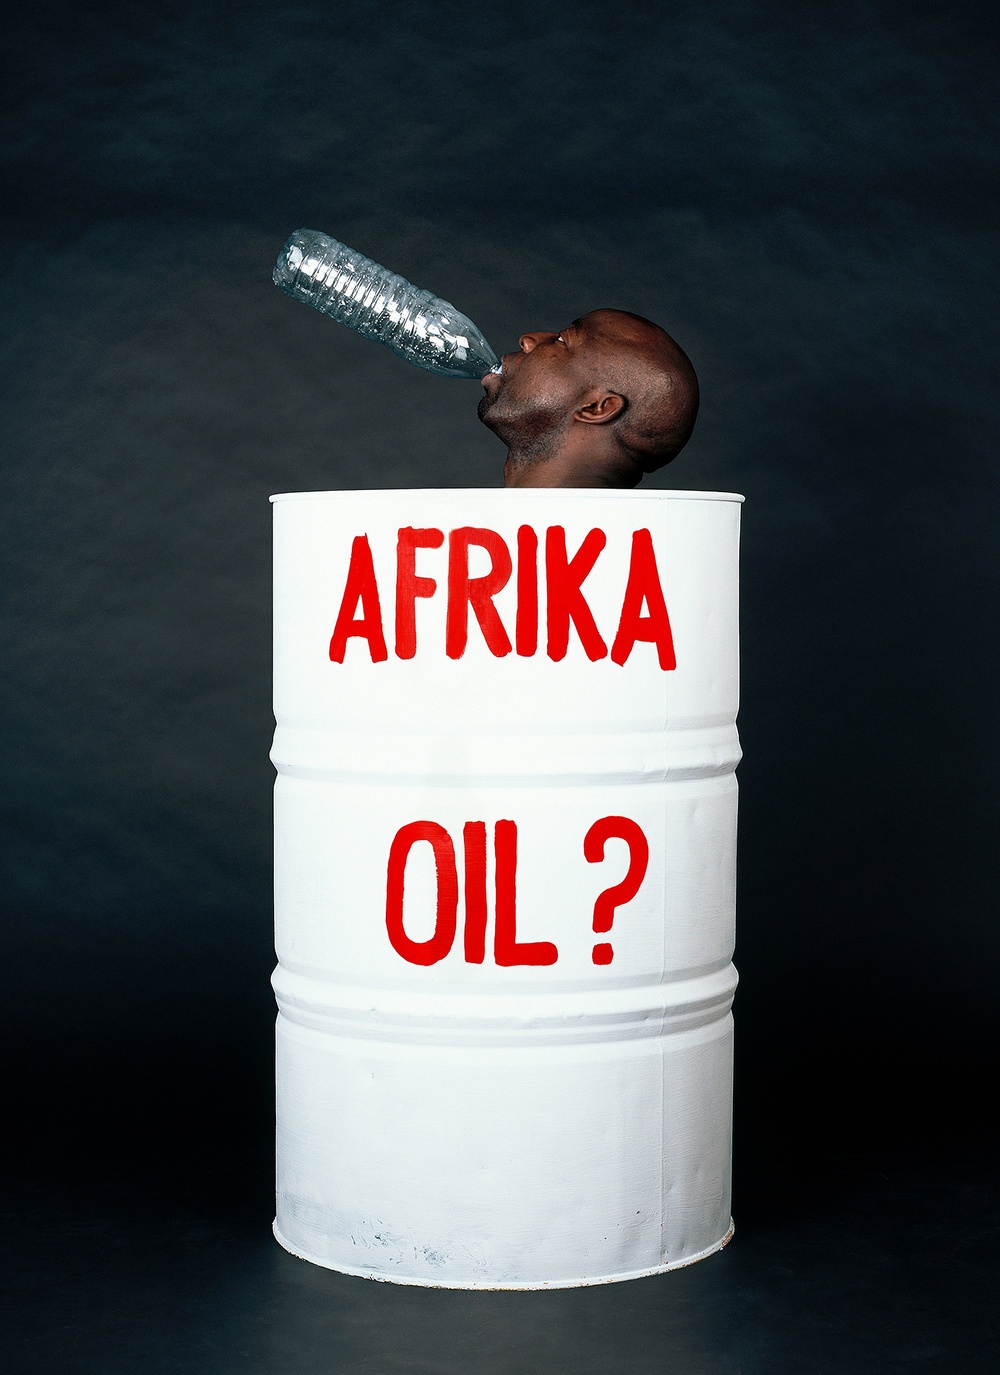 A large white barrel says “AFRIKA OIL?” on it in red and a black man’s head leans out of the top with a plastic bottle in his mouth.